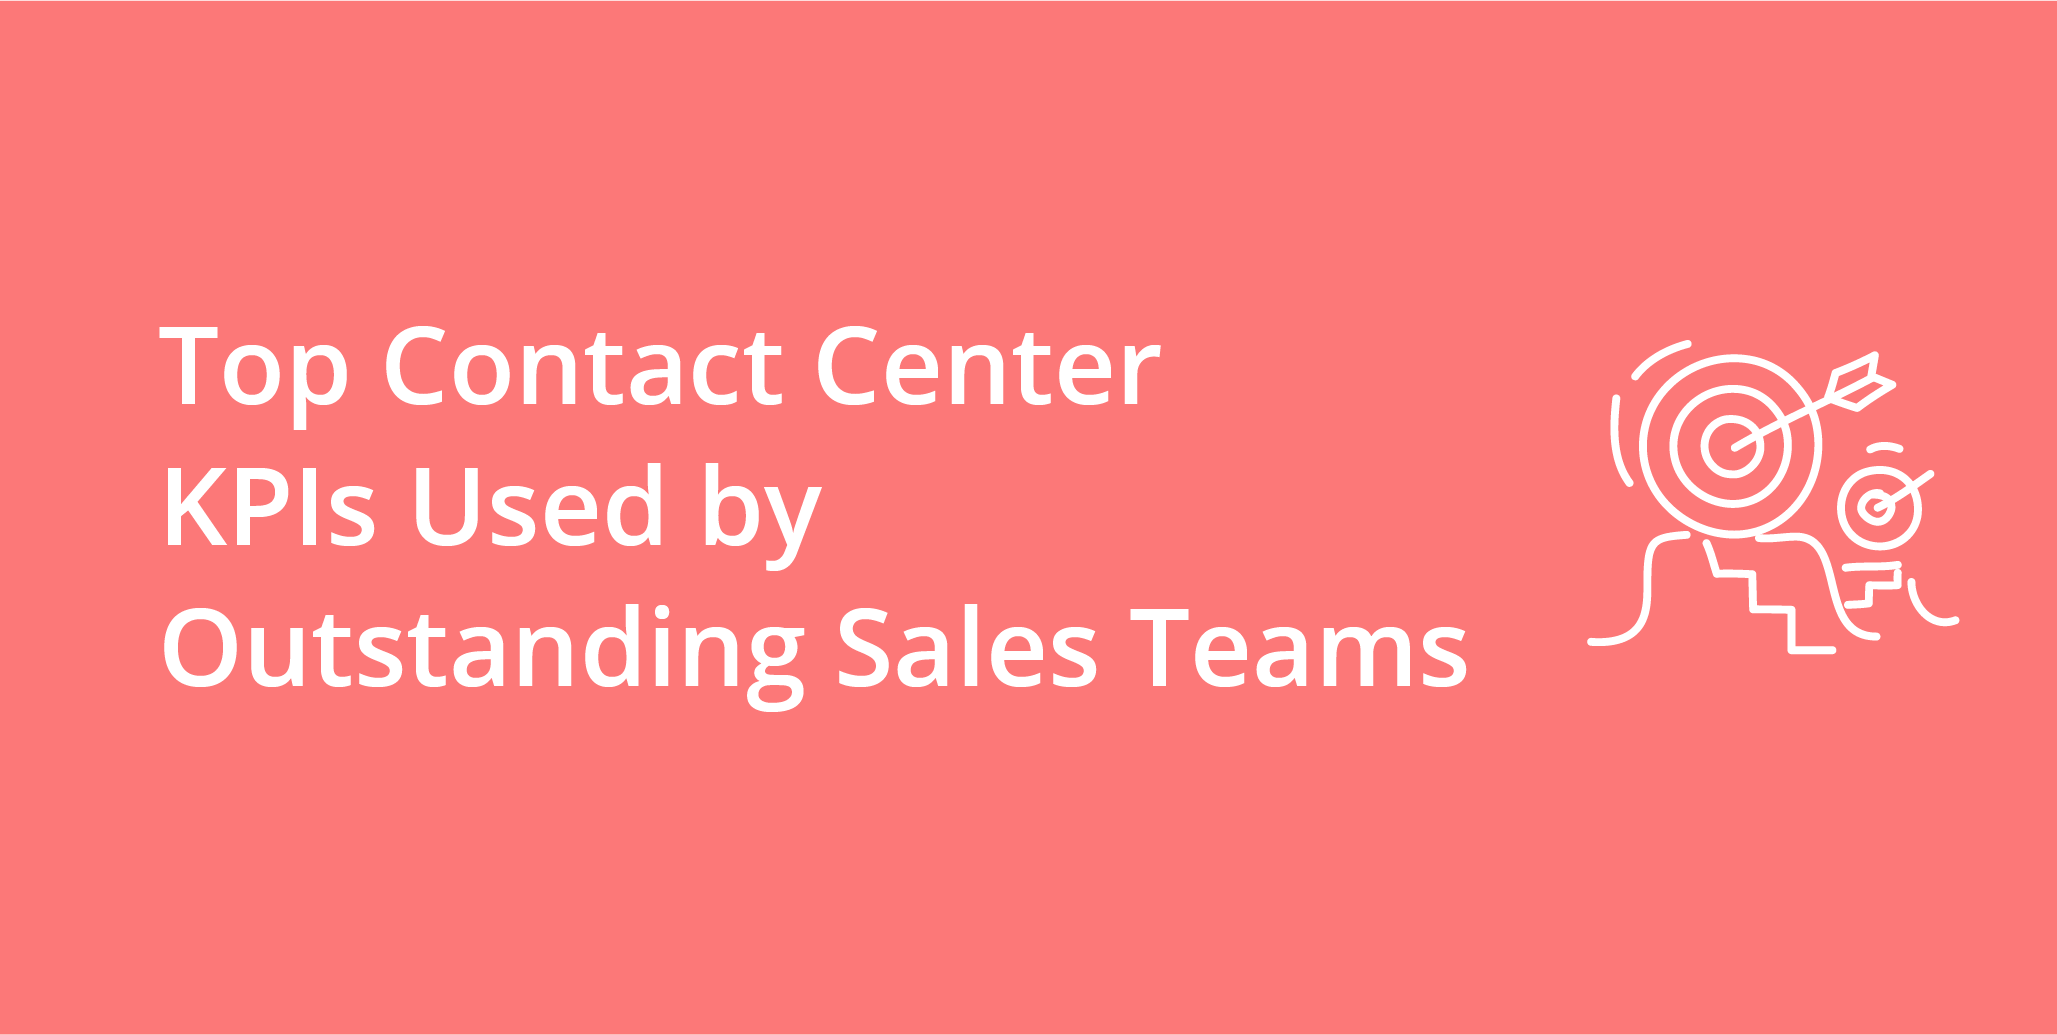 Top Contact Center KPIs Used by Outstanding Sales Teams